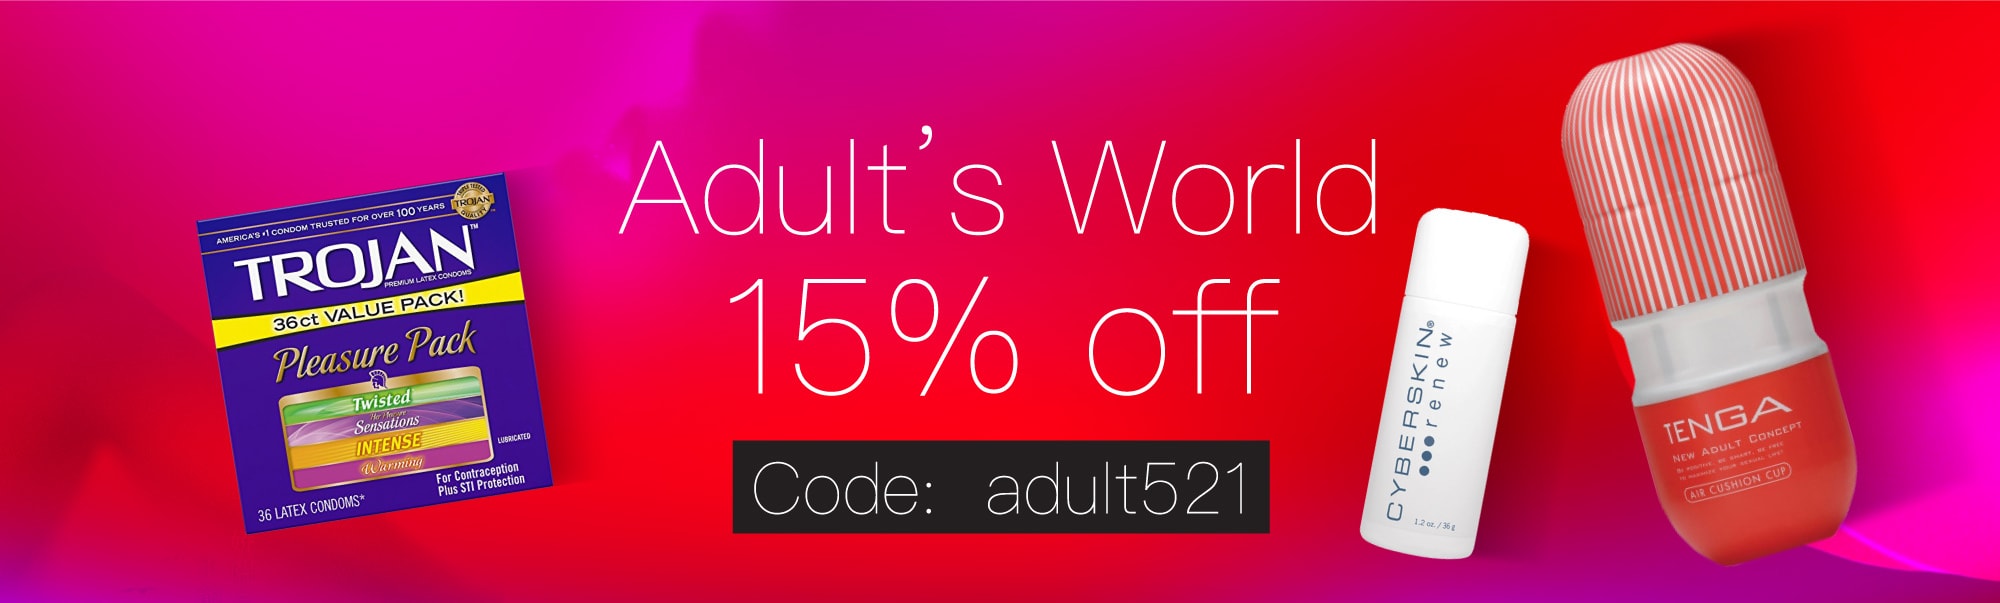 Adult’s World  15%off